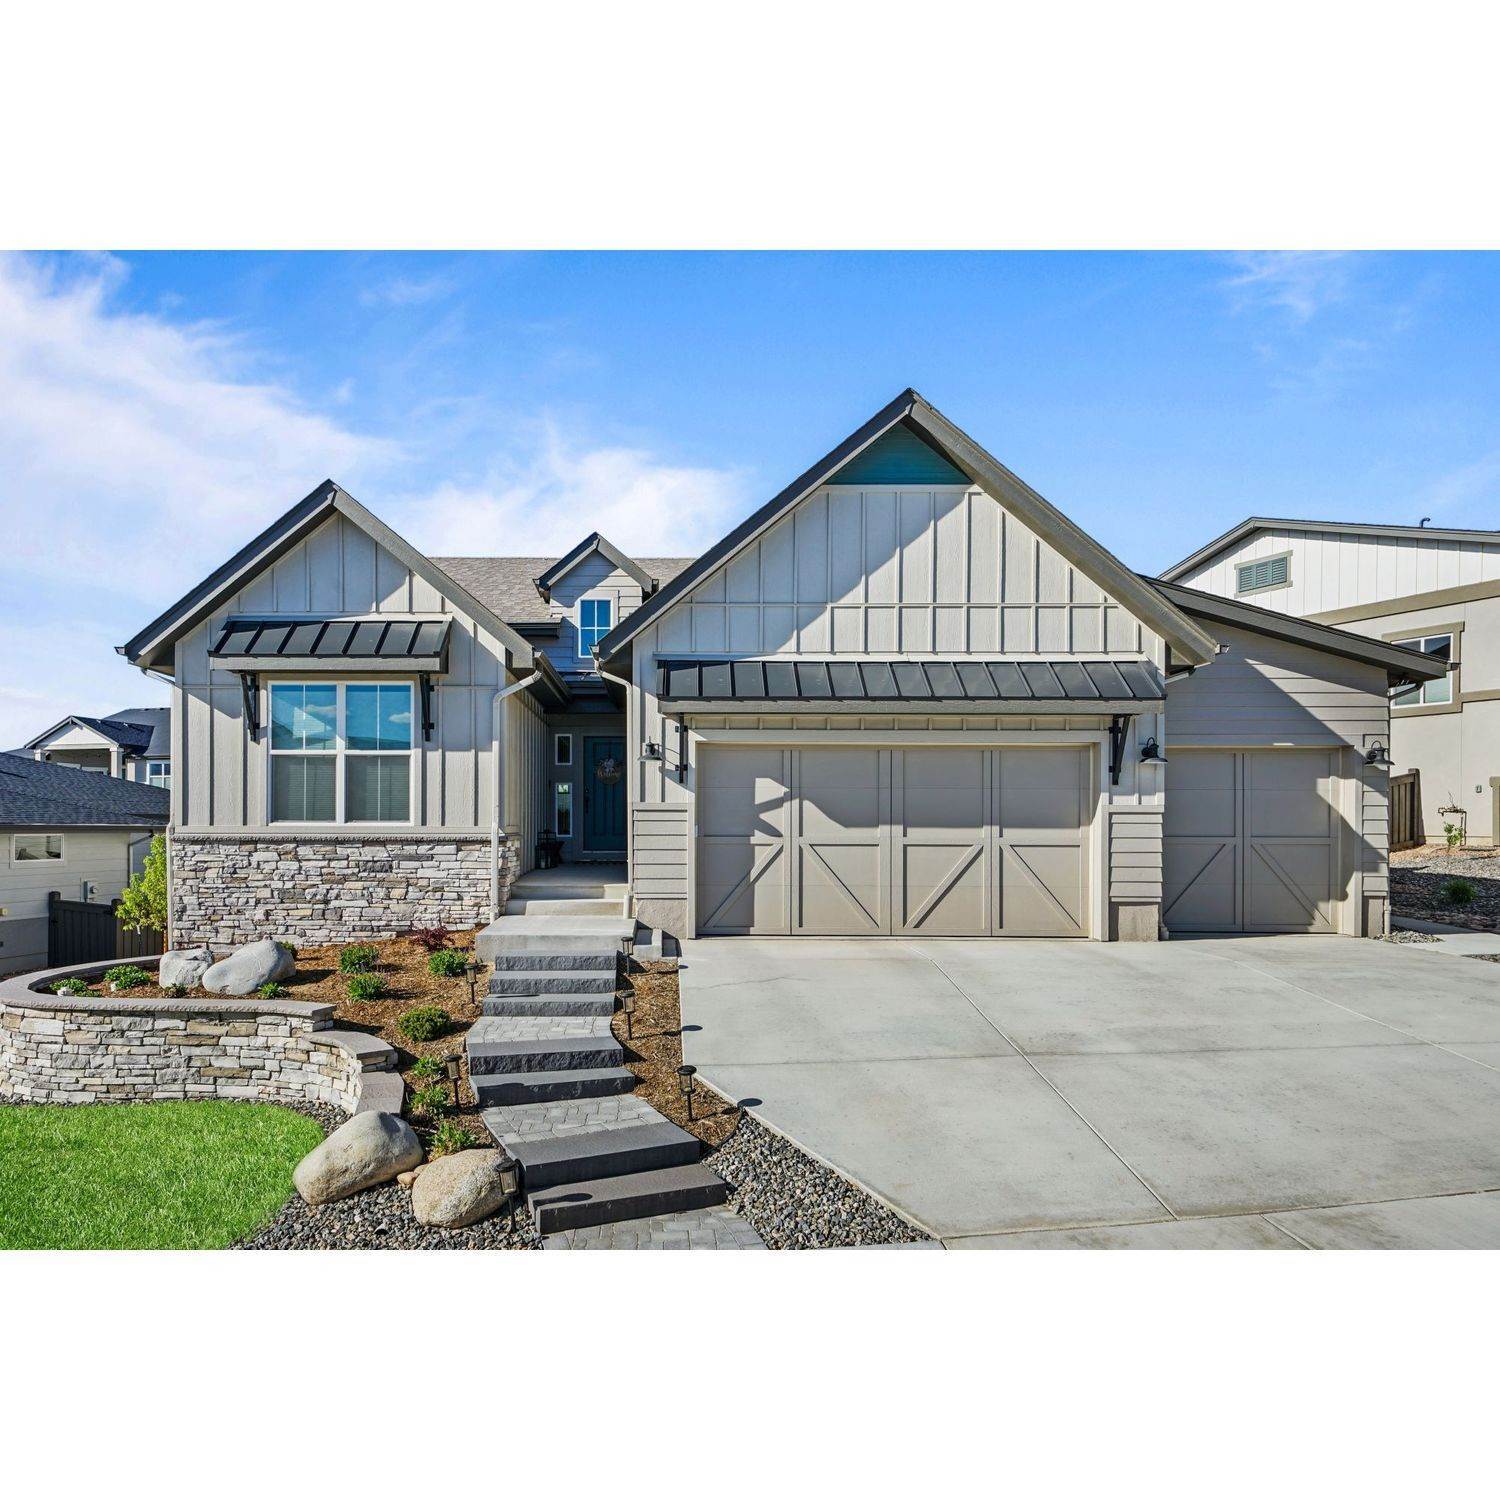 16426 Monument Rock Court, Monument, CO 80132에 Home Place Ranch 건물